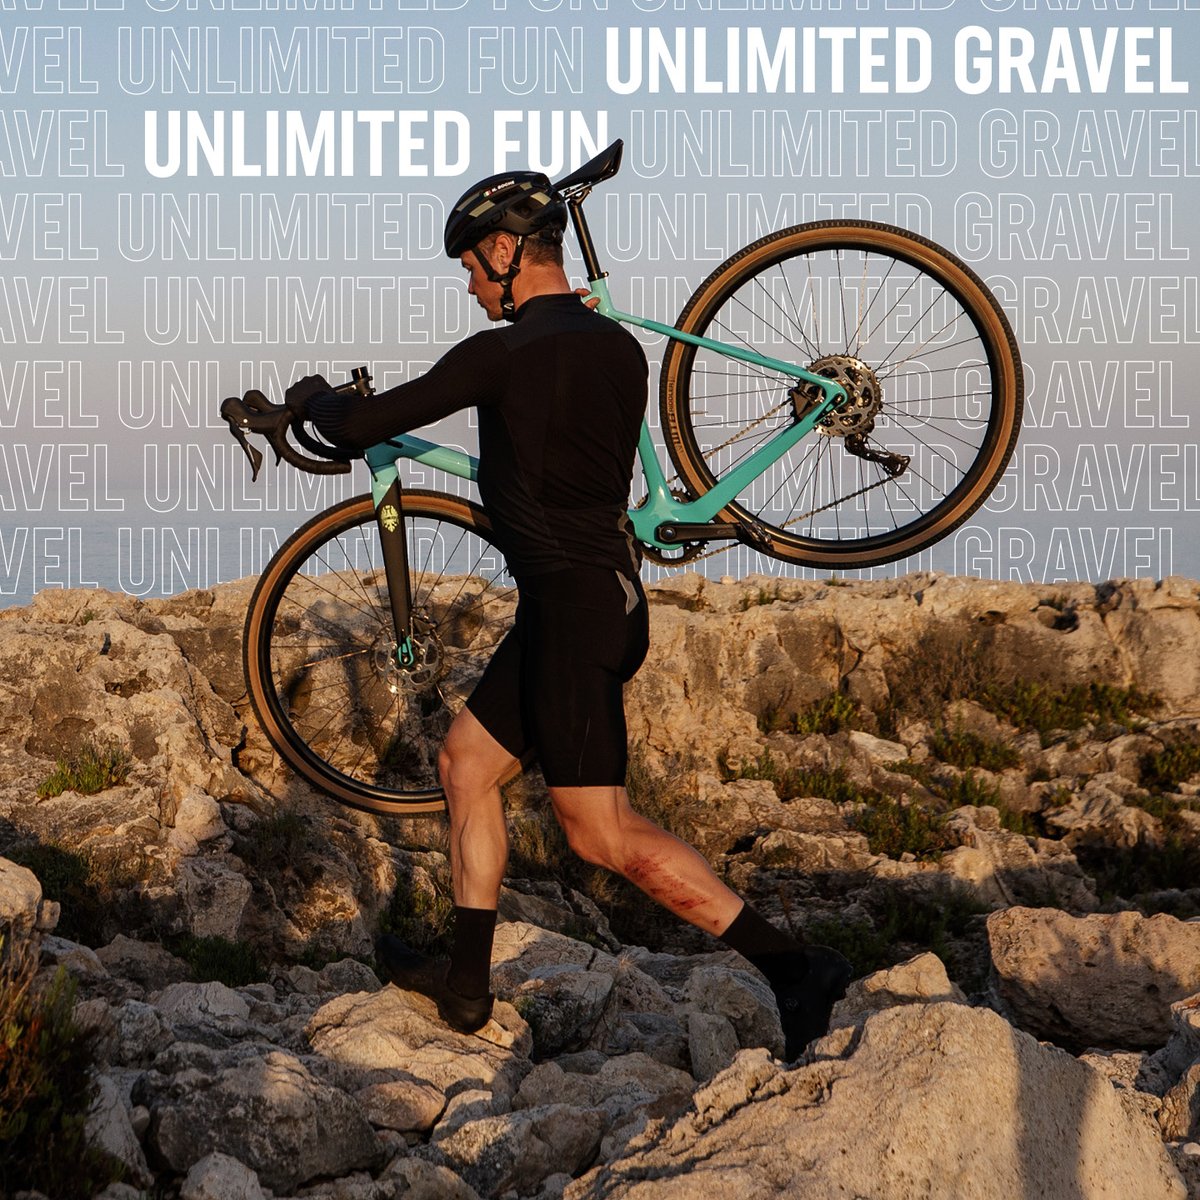 From gravel roads to iconic strade bianche and fast enough on the tarmac. The Impulso Pro is all the bike you need.
👉bit.ly/3aQy0NS 

#Bianchi #RideBianchi #BianchiBicycles #ImpulsoPro #Gravel #UnlimitedGravel #UnlimitedFun